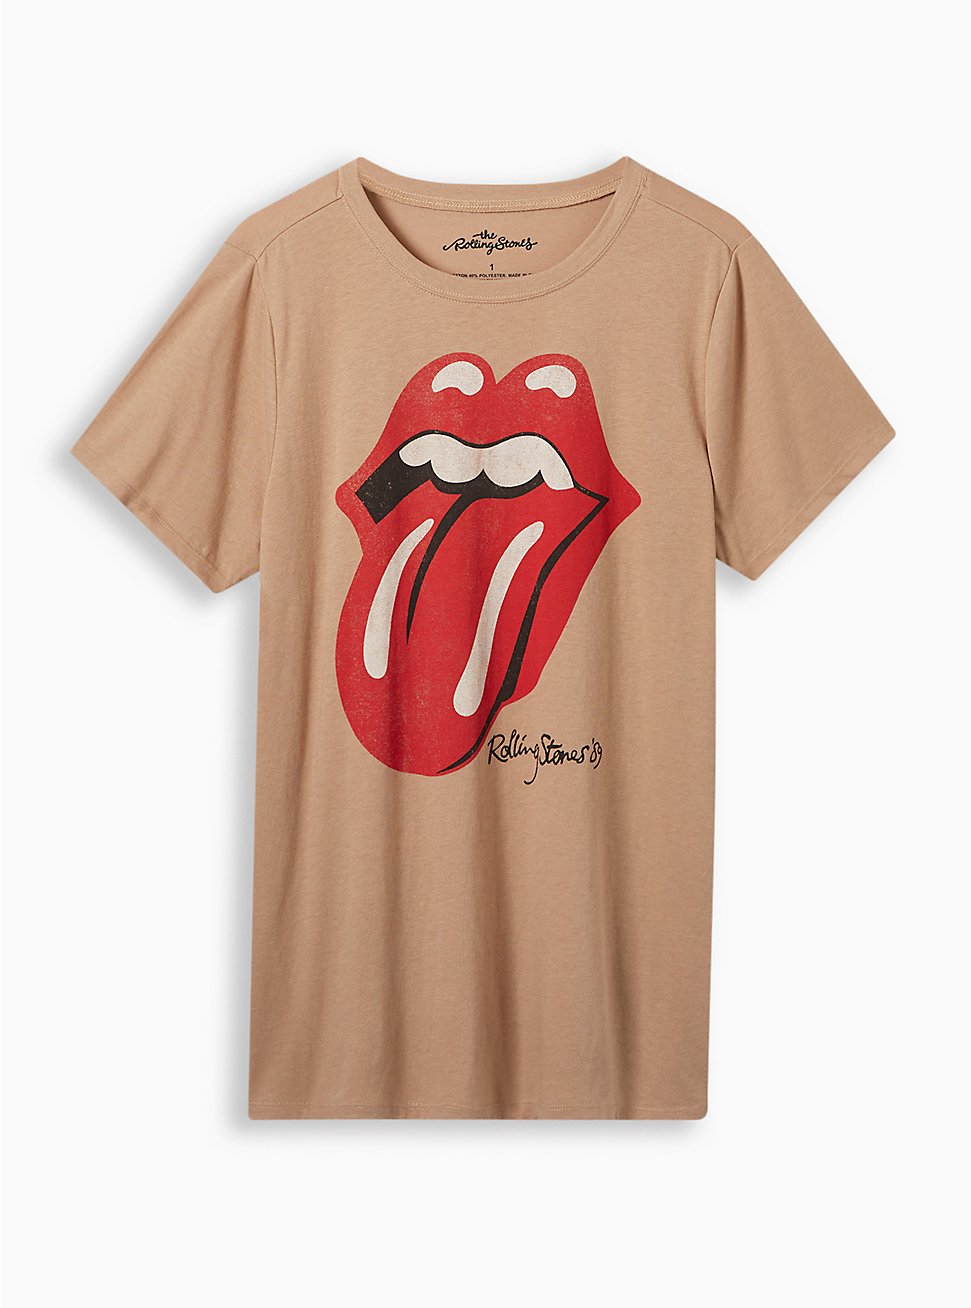 Plus Size Classic Crew Tee - Cotton Rolling Stones Taupe, TAUPE, hi-res